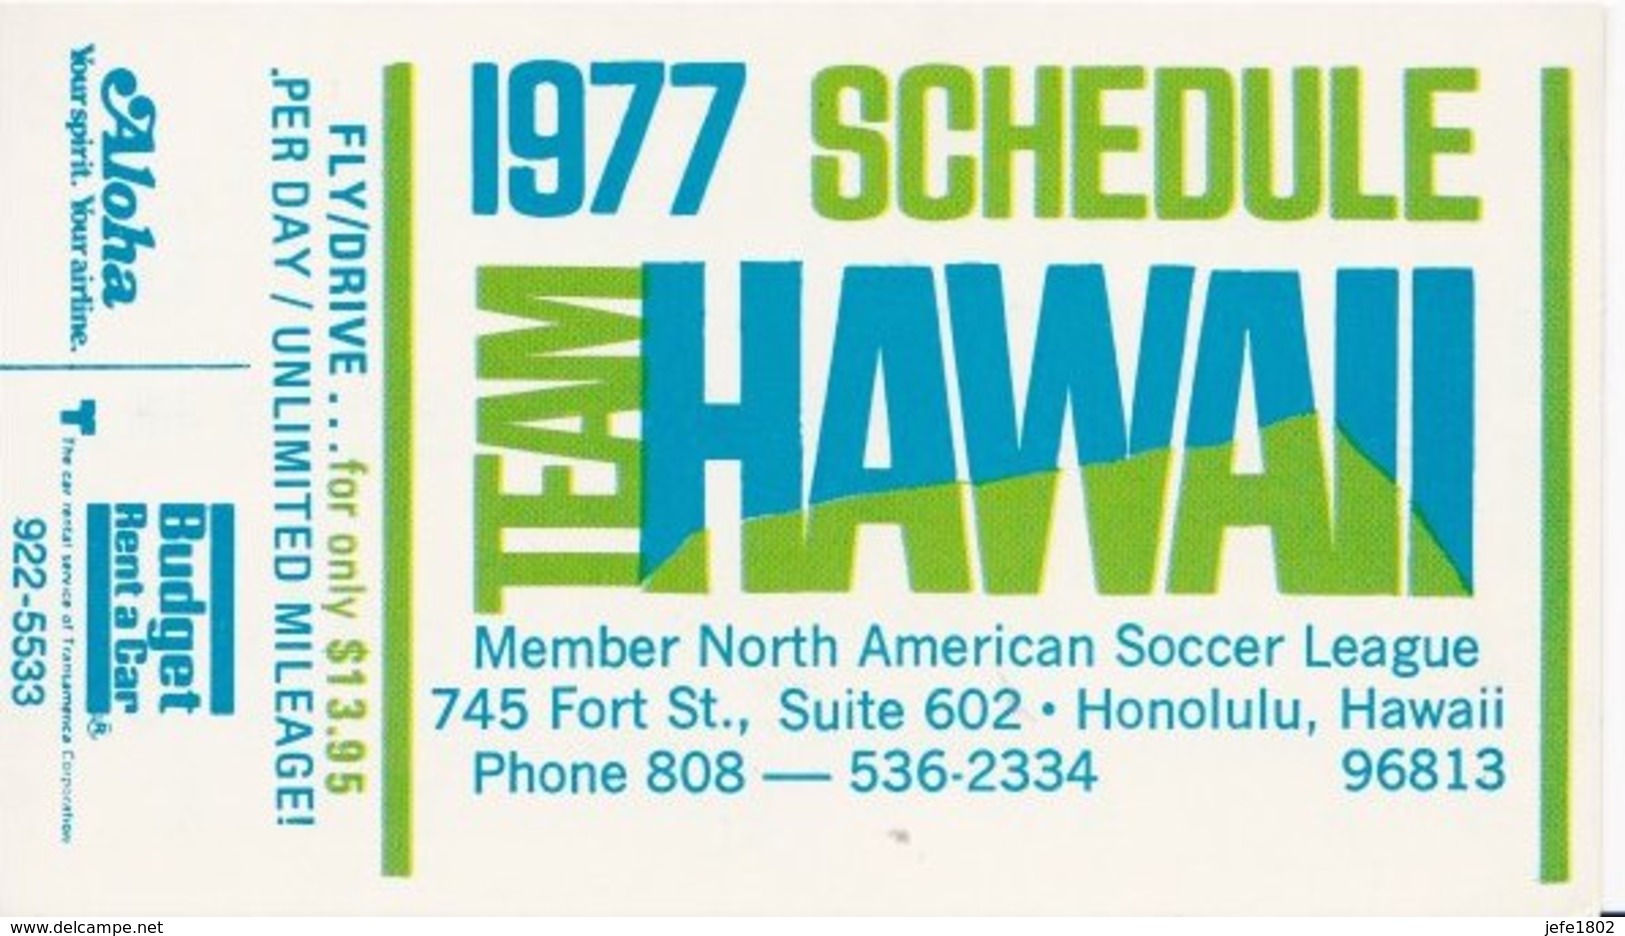 Tickets Hawaii 1977 - Louisville 1997 - 1996 Cardinal Station - 2000 Colombus Crew Stadium - Other & Unclassified